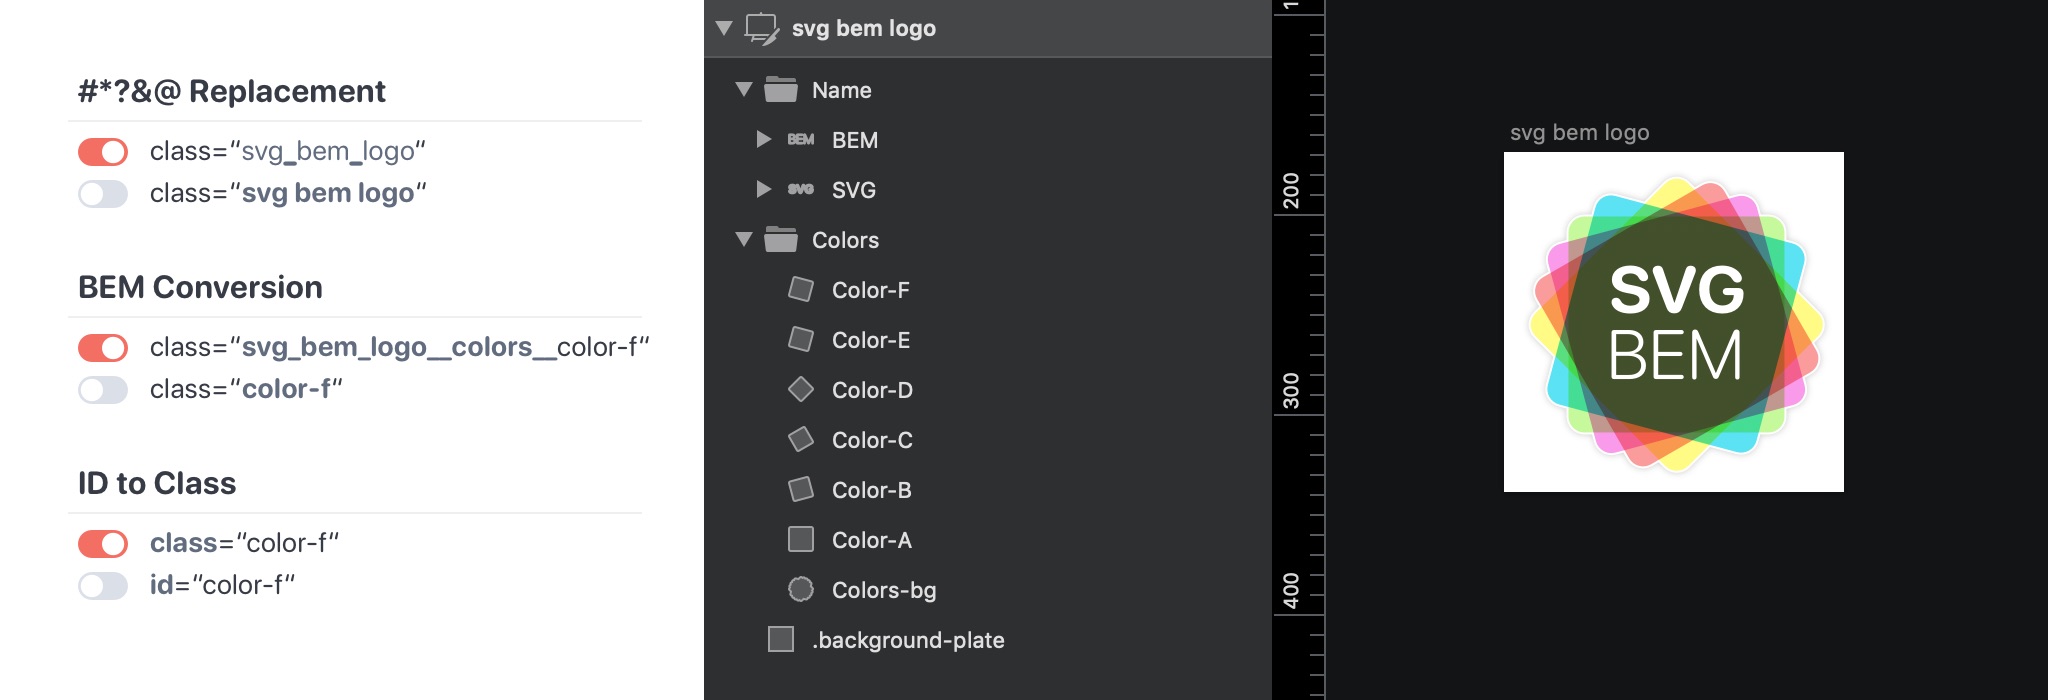 Download Github Mlihs Svg Bem A Plugin For Svg Assets To Convert Ids To Classes Create Bem Naming Based On Layes And Using Svgo To Compresse And Clean Up Svgs Right When You Export